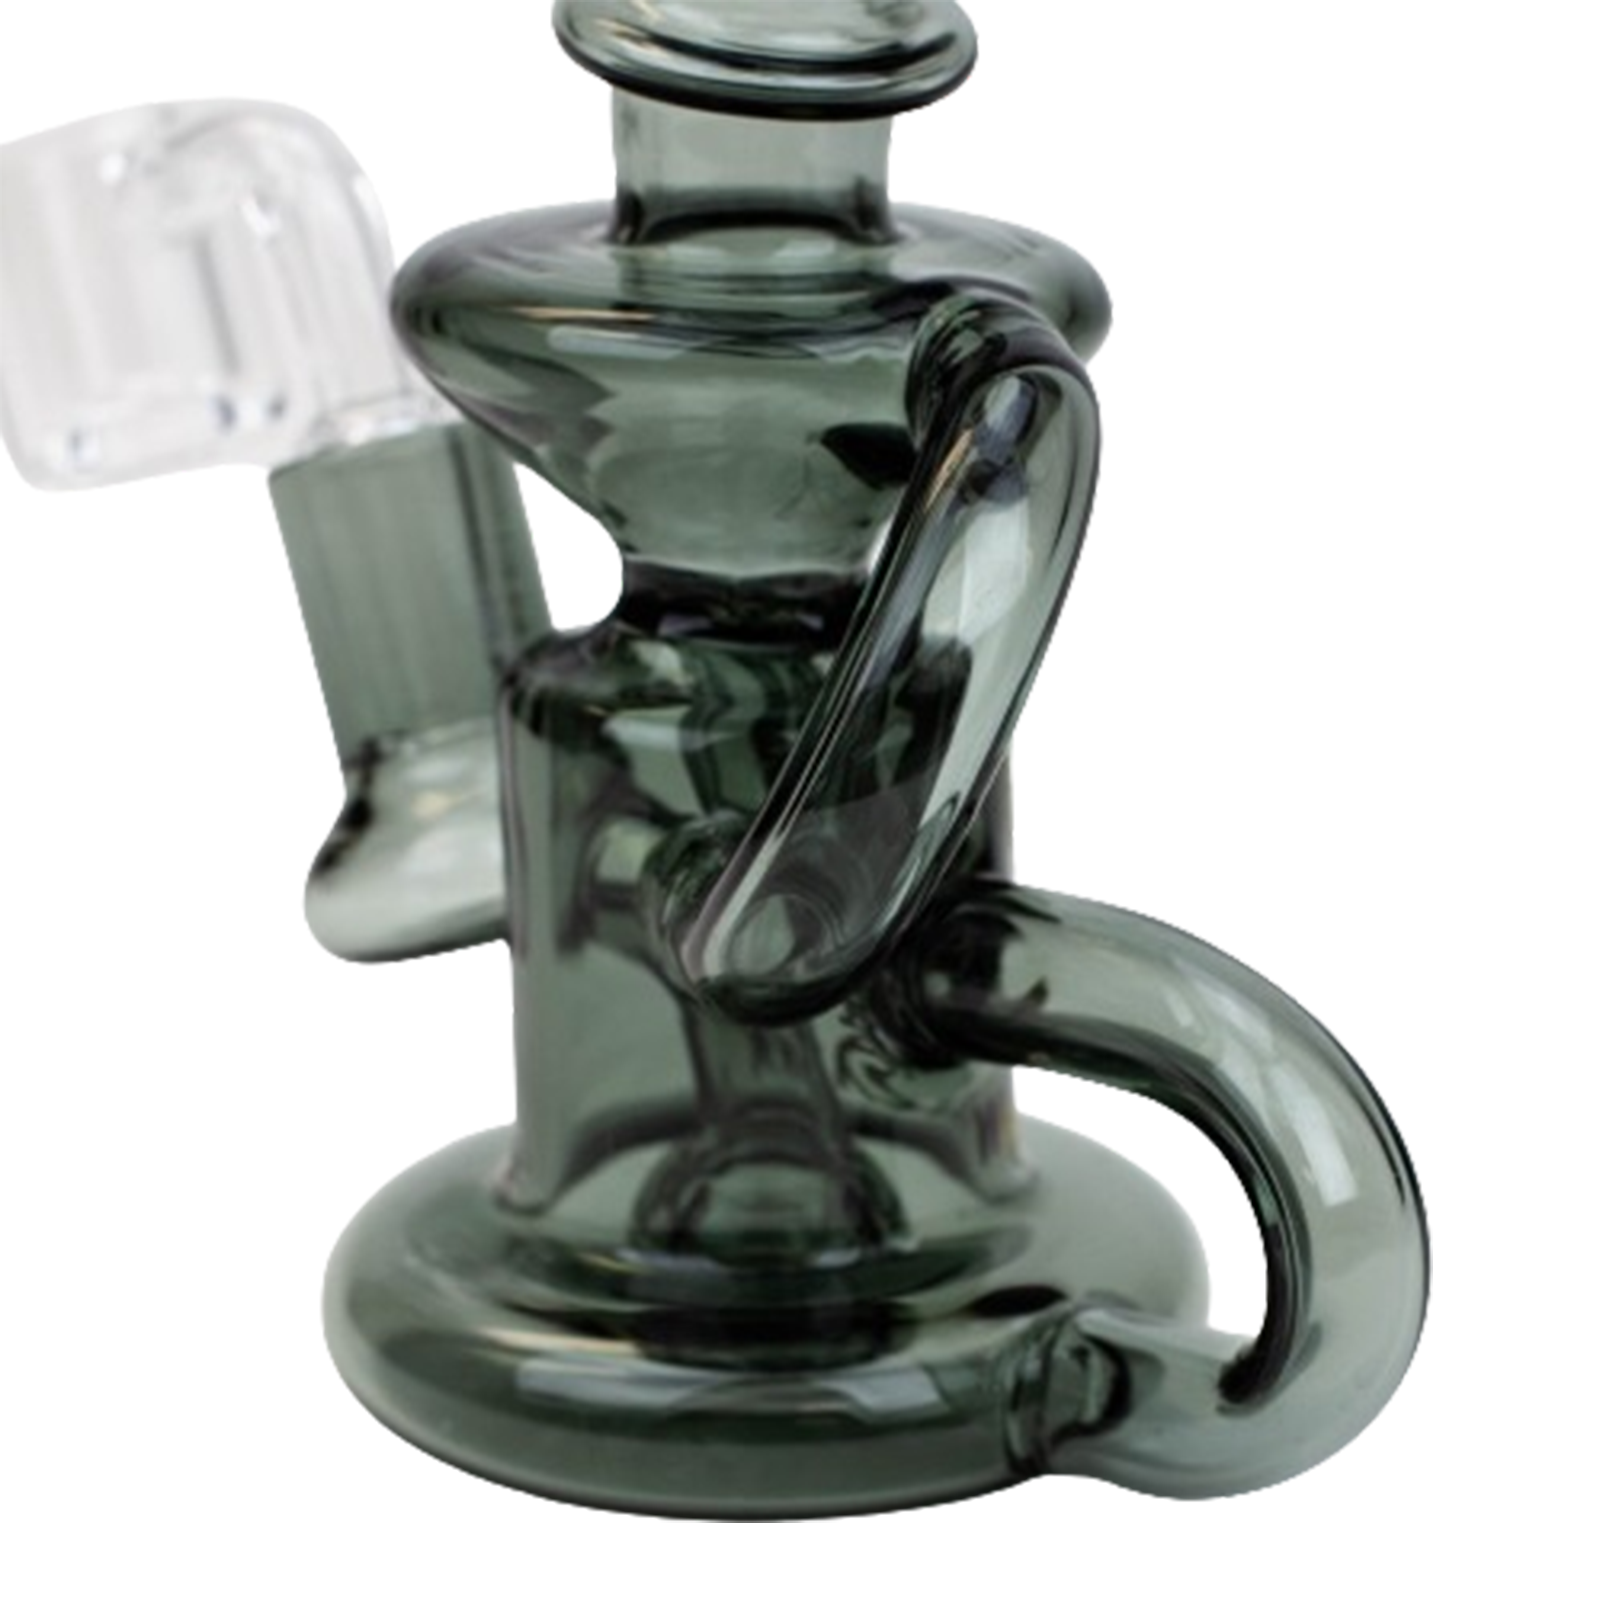 WellCann 6&quot; Double Loop Recycler Rig with Banger - INHALCO